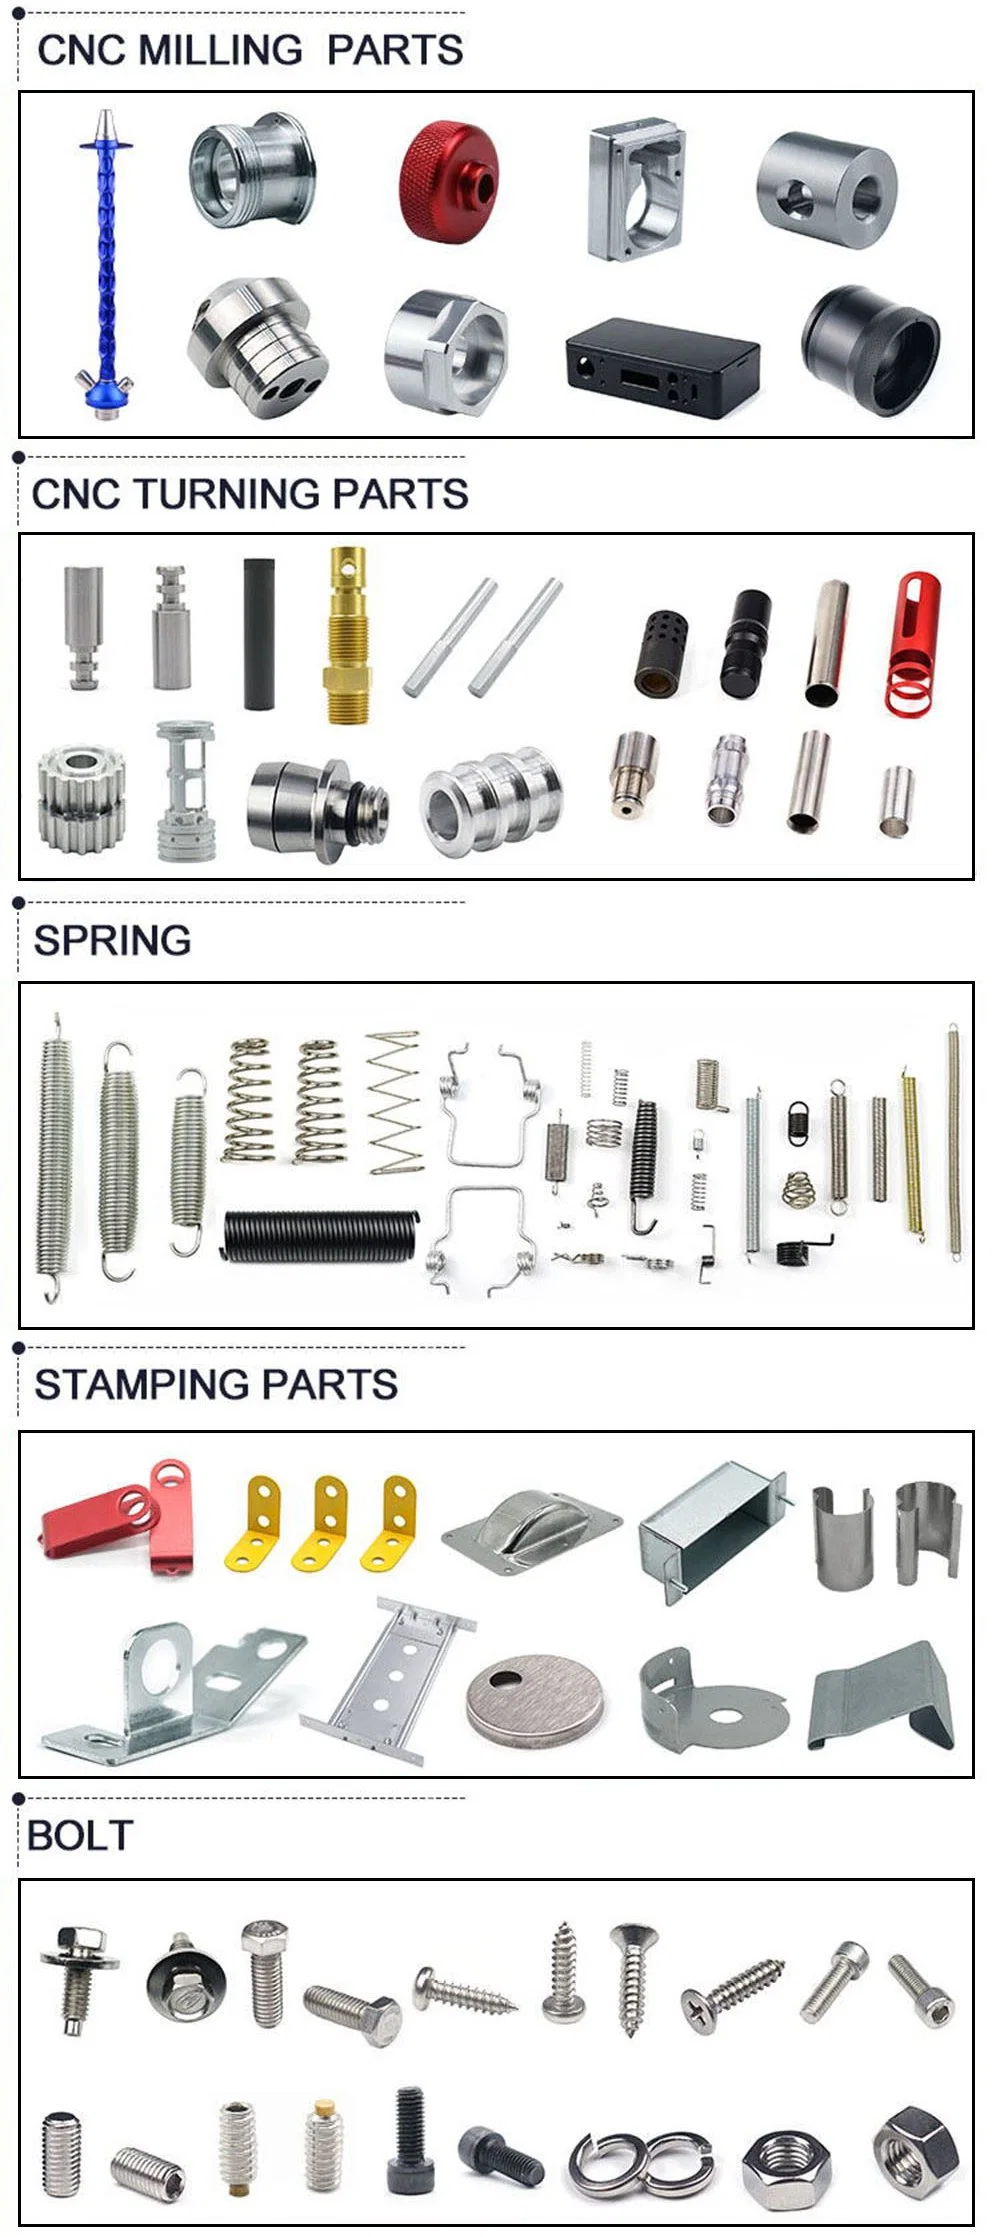 Metal Lugs Electric Crimp Terminal Customized Cable Lugs and Connectors Stamping Parts Non-Insulated Ring Type Pre-Insulated Copper Cable Terminal Lug